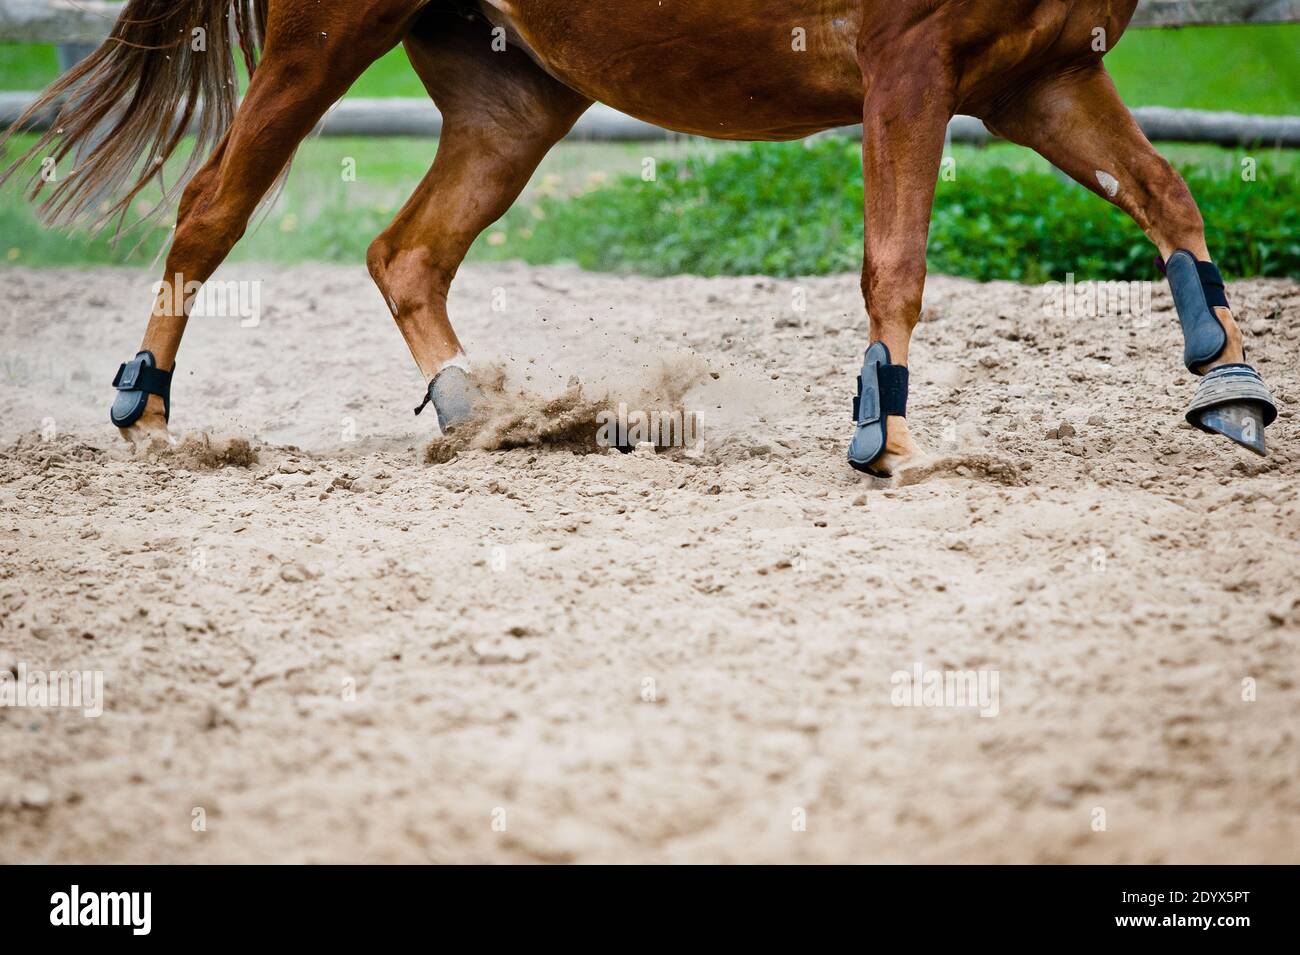 horse galloping in paddock Stock Photo